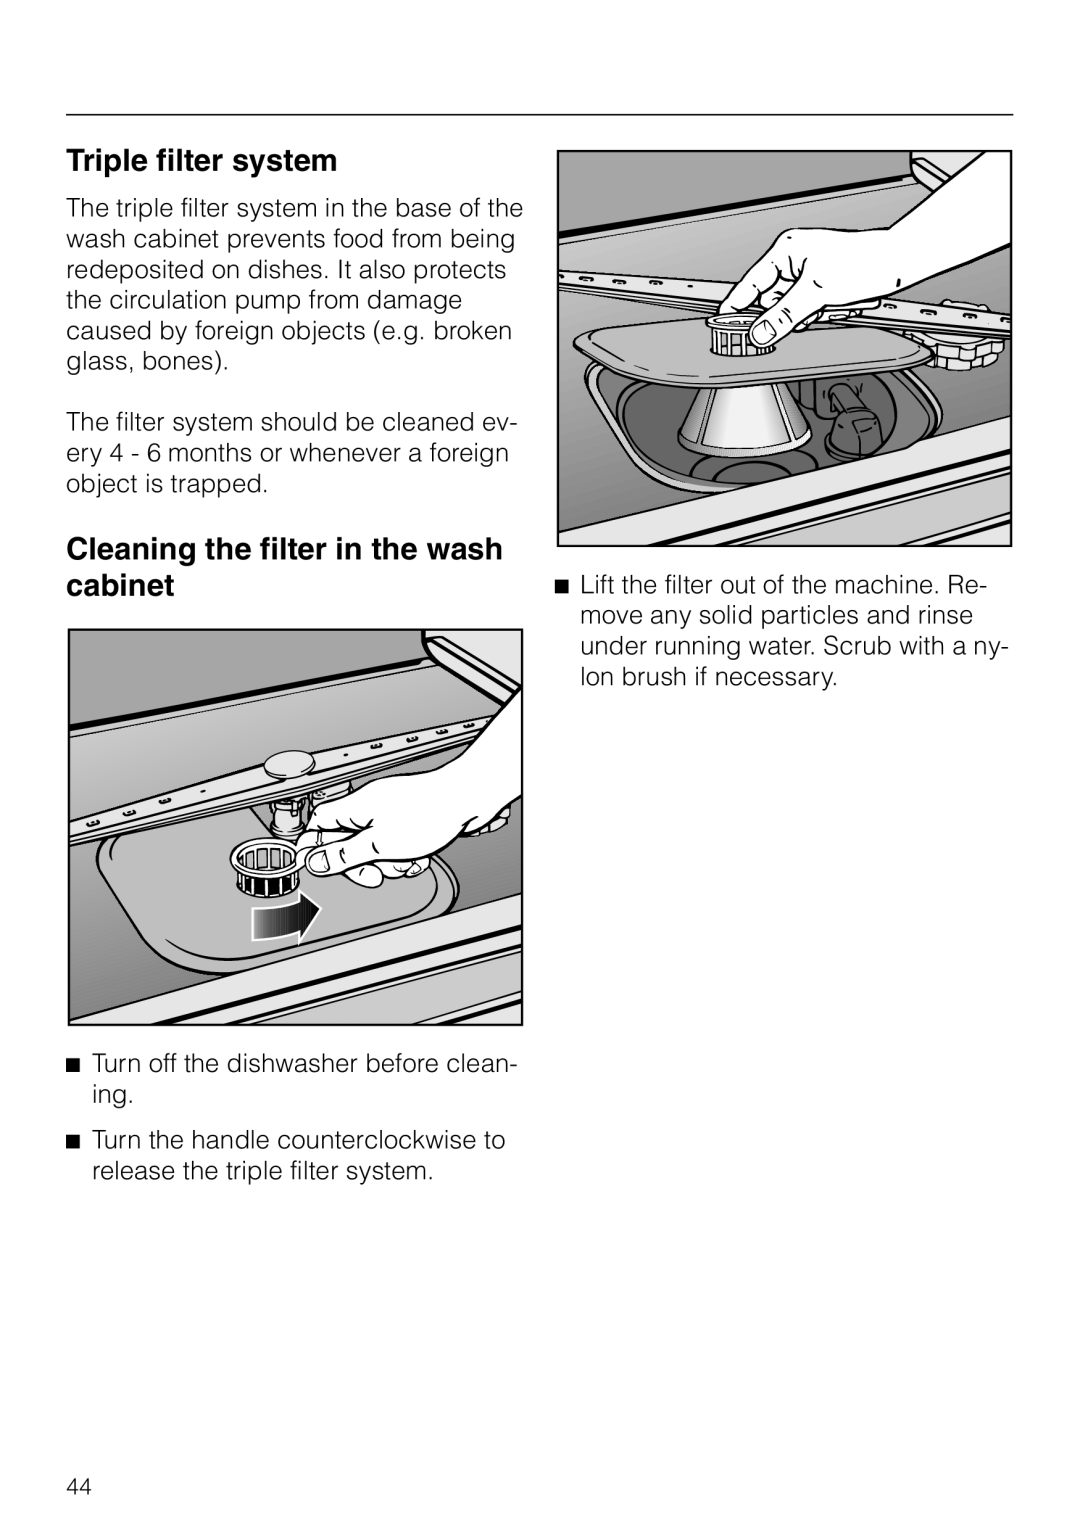 Miele G 851 operating instructions Triple filter system, Cleaning the filter in the wash cabinet 